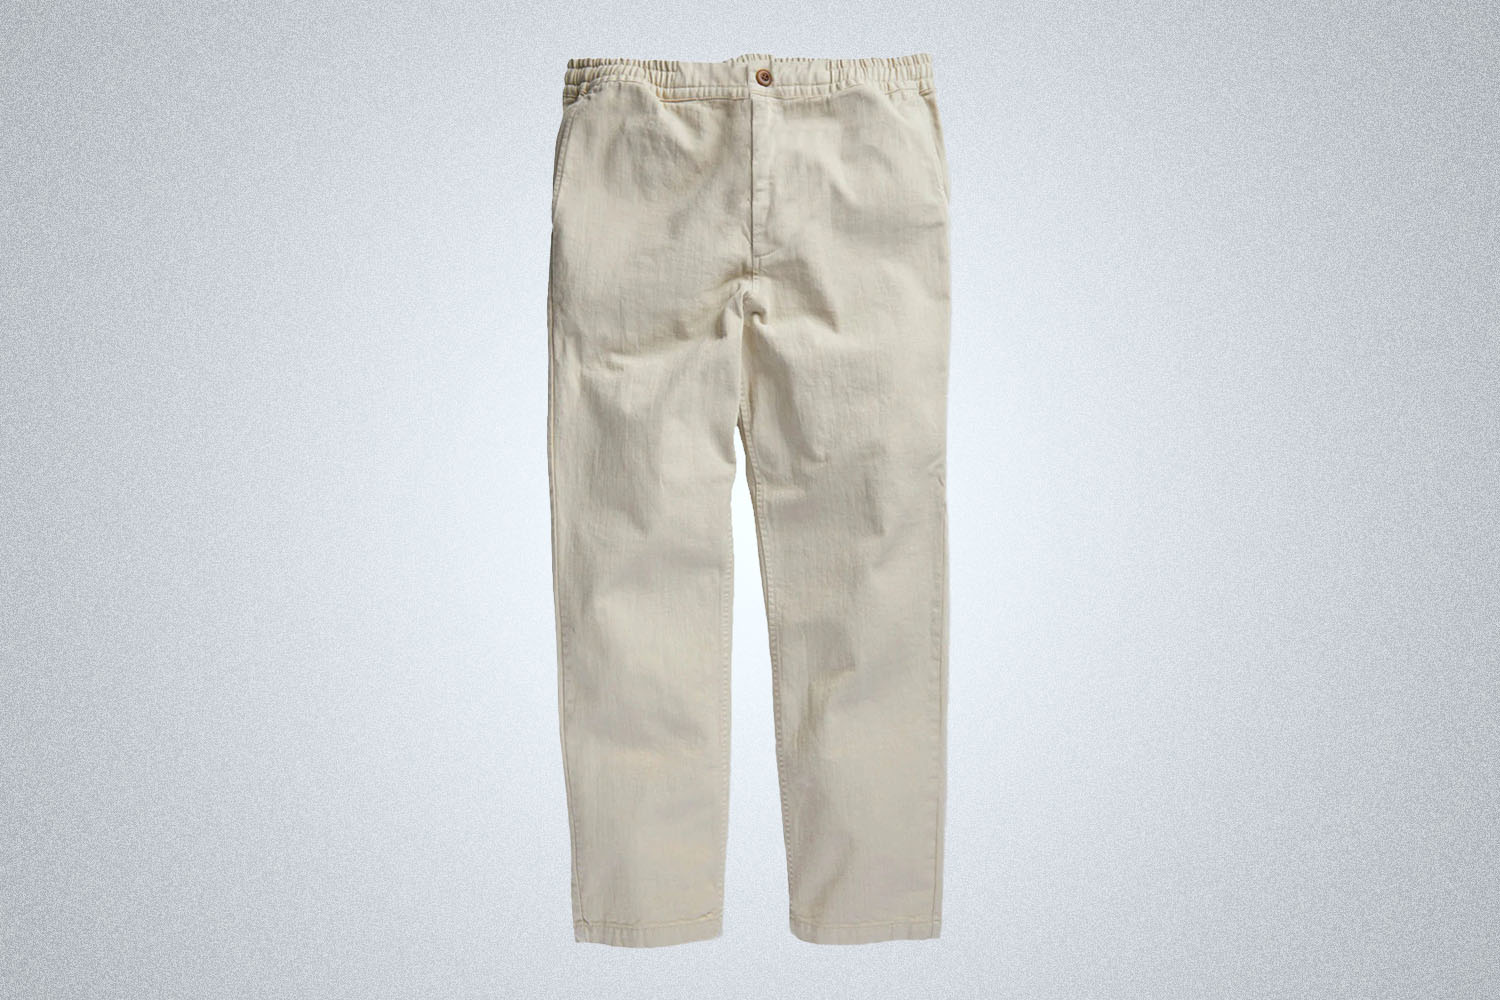 a pair of white outerknown jeans on a grey background